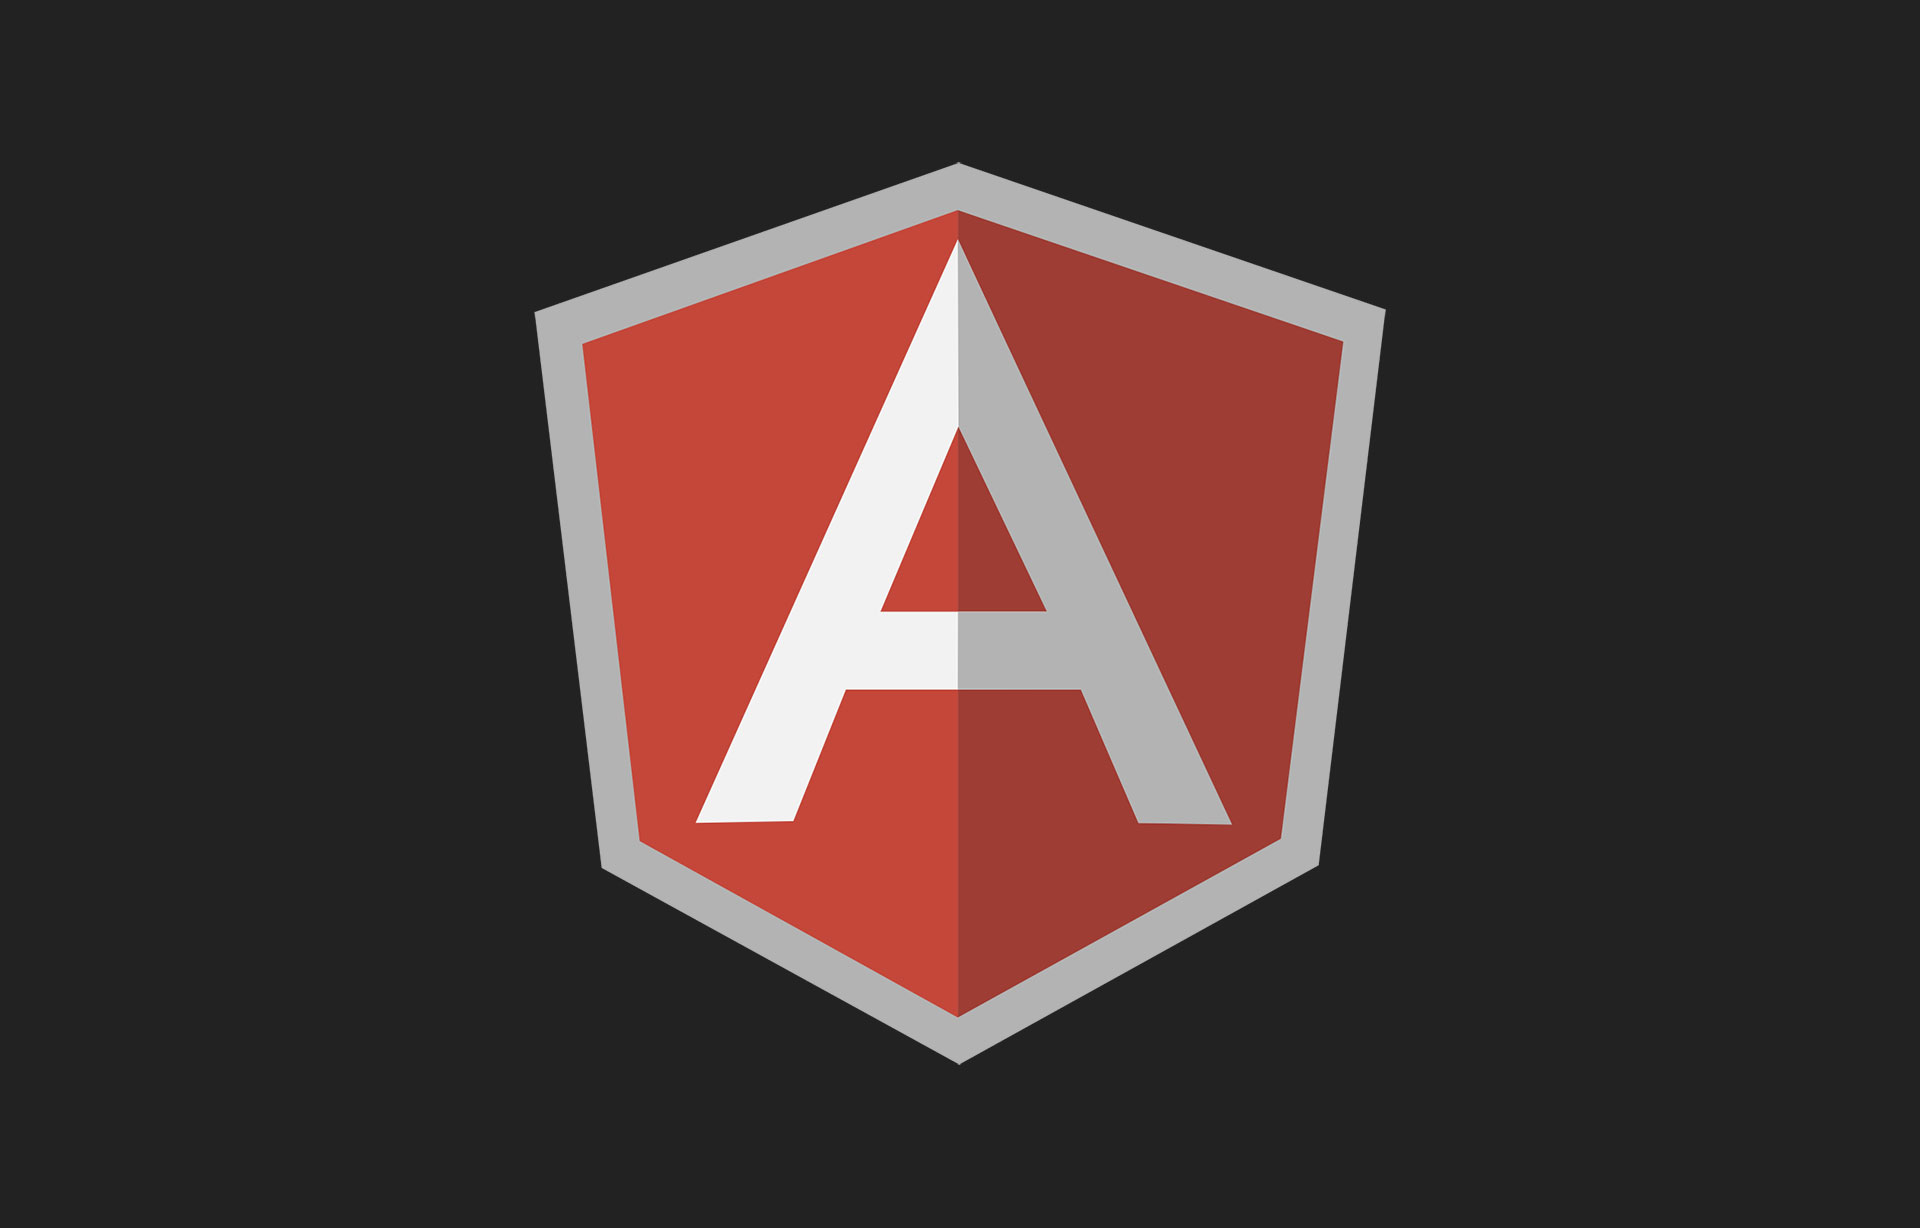 Introduction to AngularJS for jQuery developers